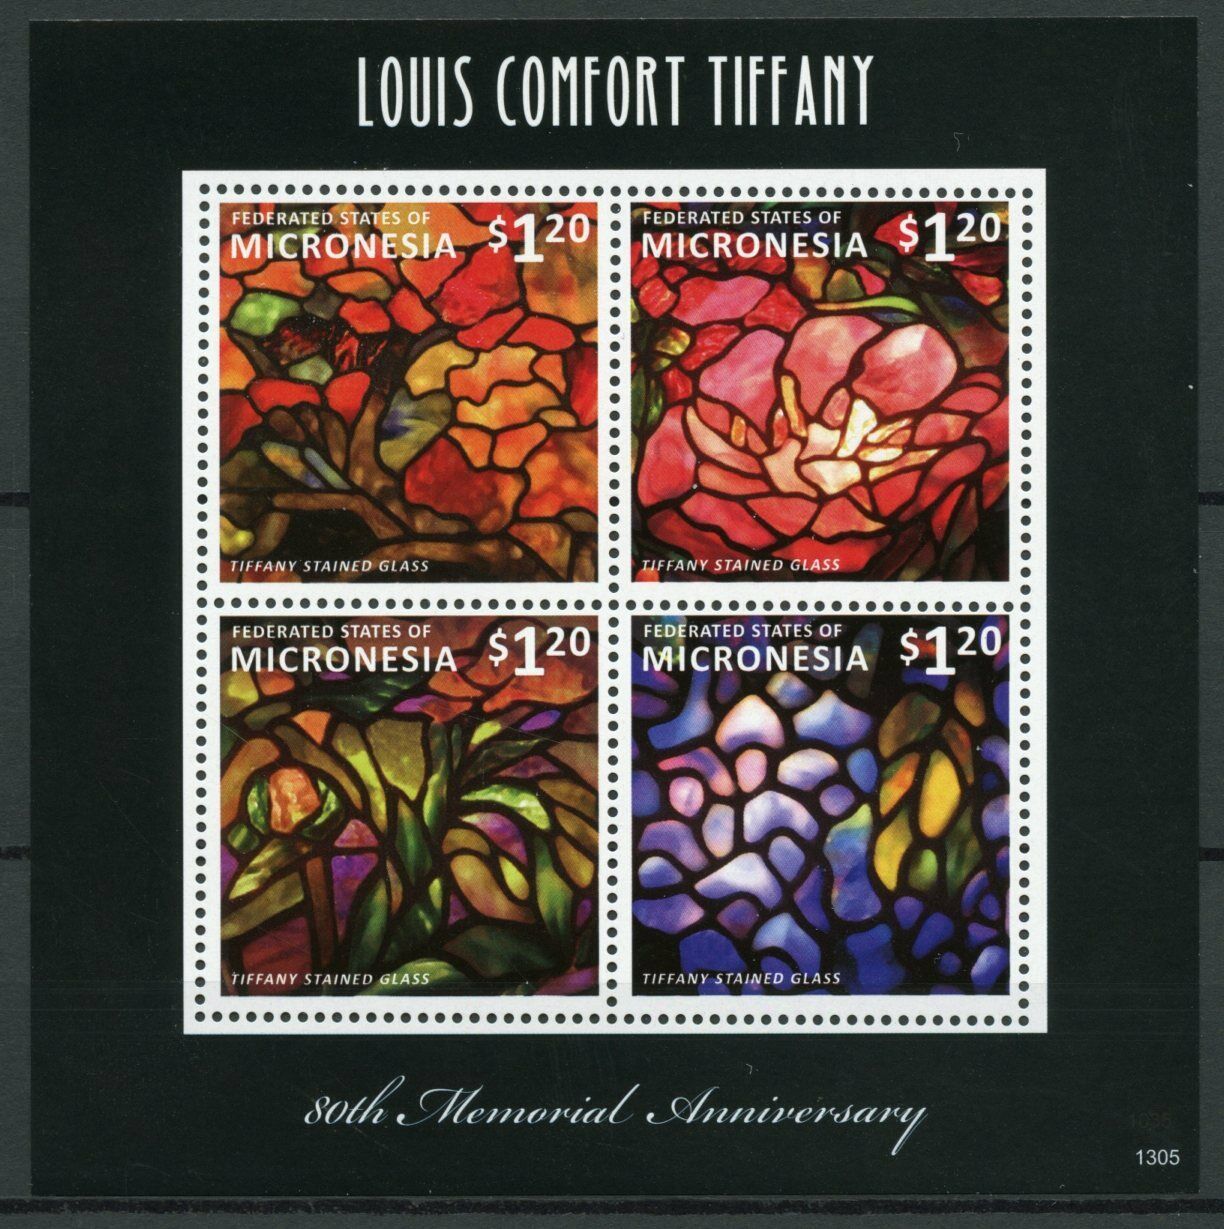 Micronesia 2013 MNH Art Stamps Louis Comfort Tiffany Stained Glass 4v M/S